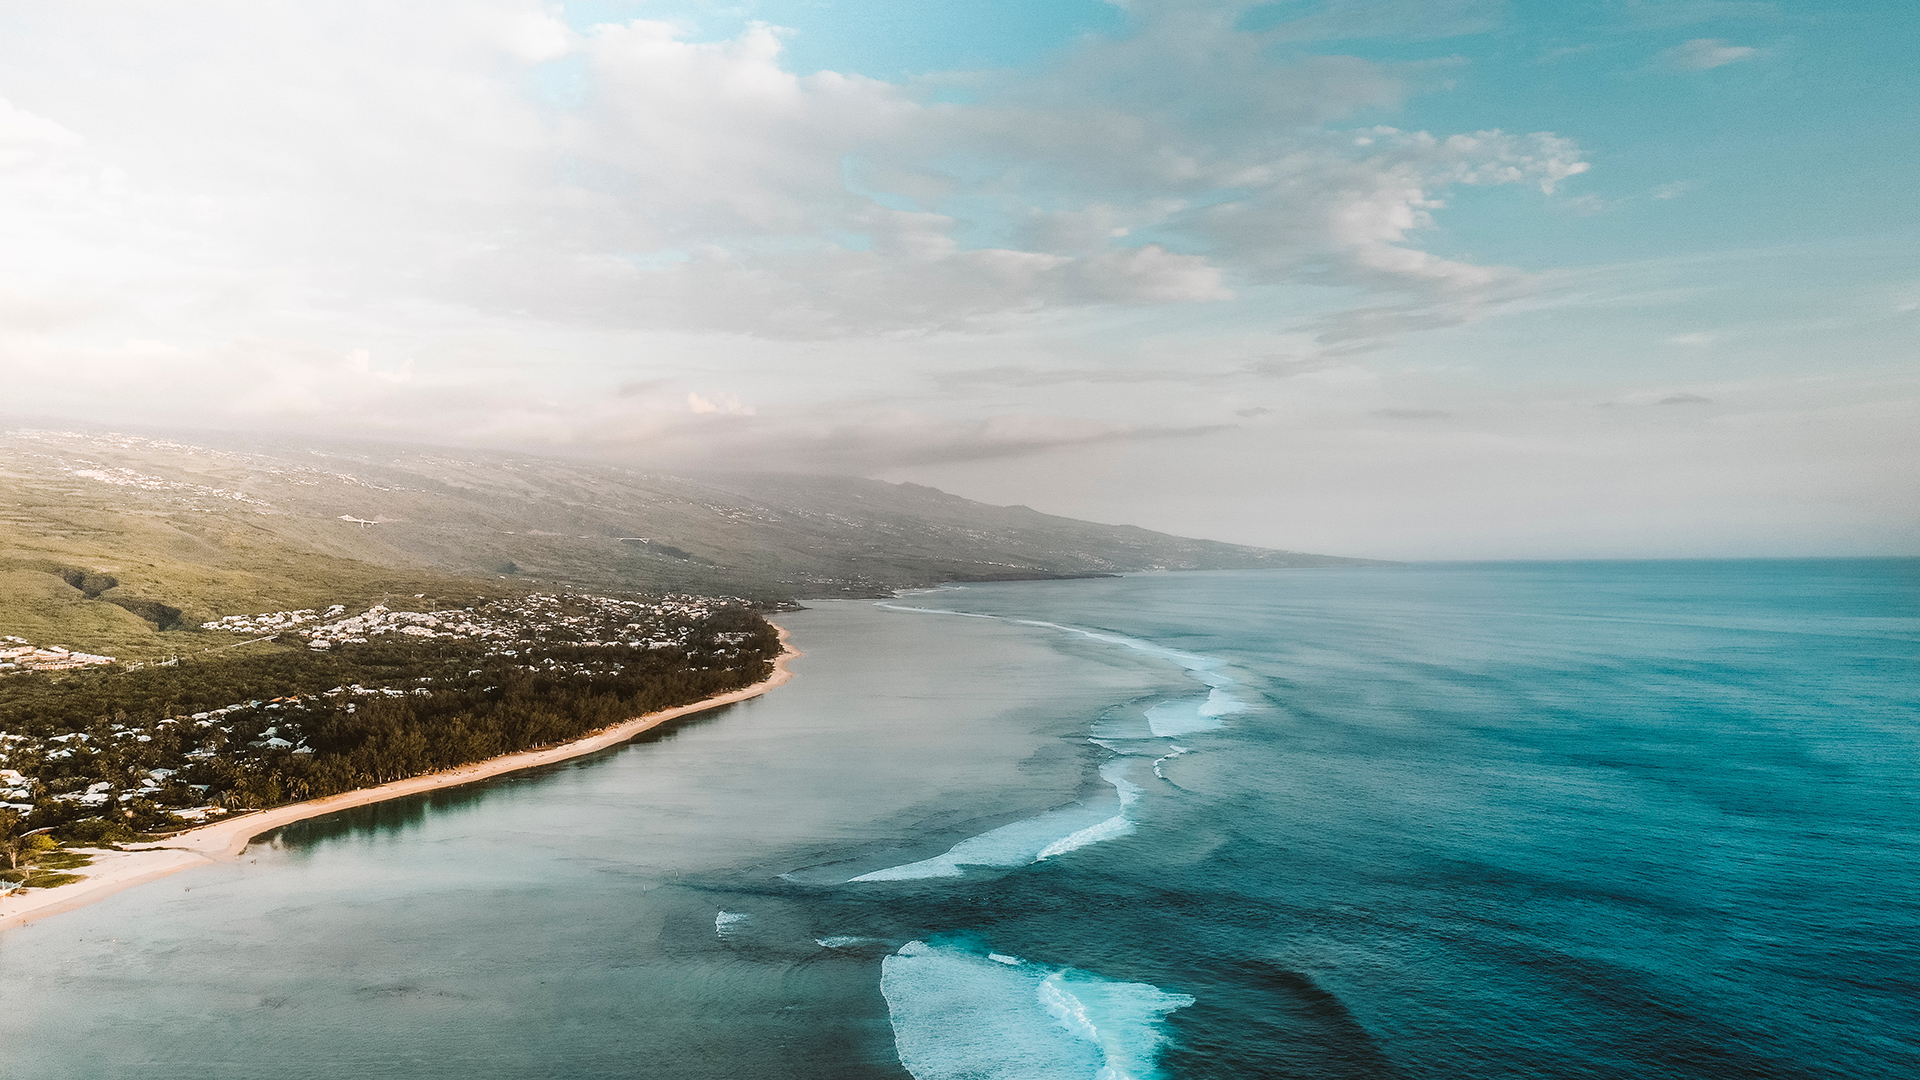 General 1920x1080 water photography sea nature outdoors sky coast aerial view landscape Reunion Island